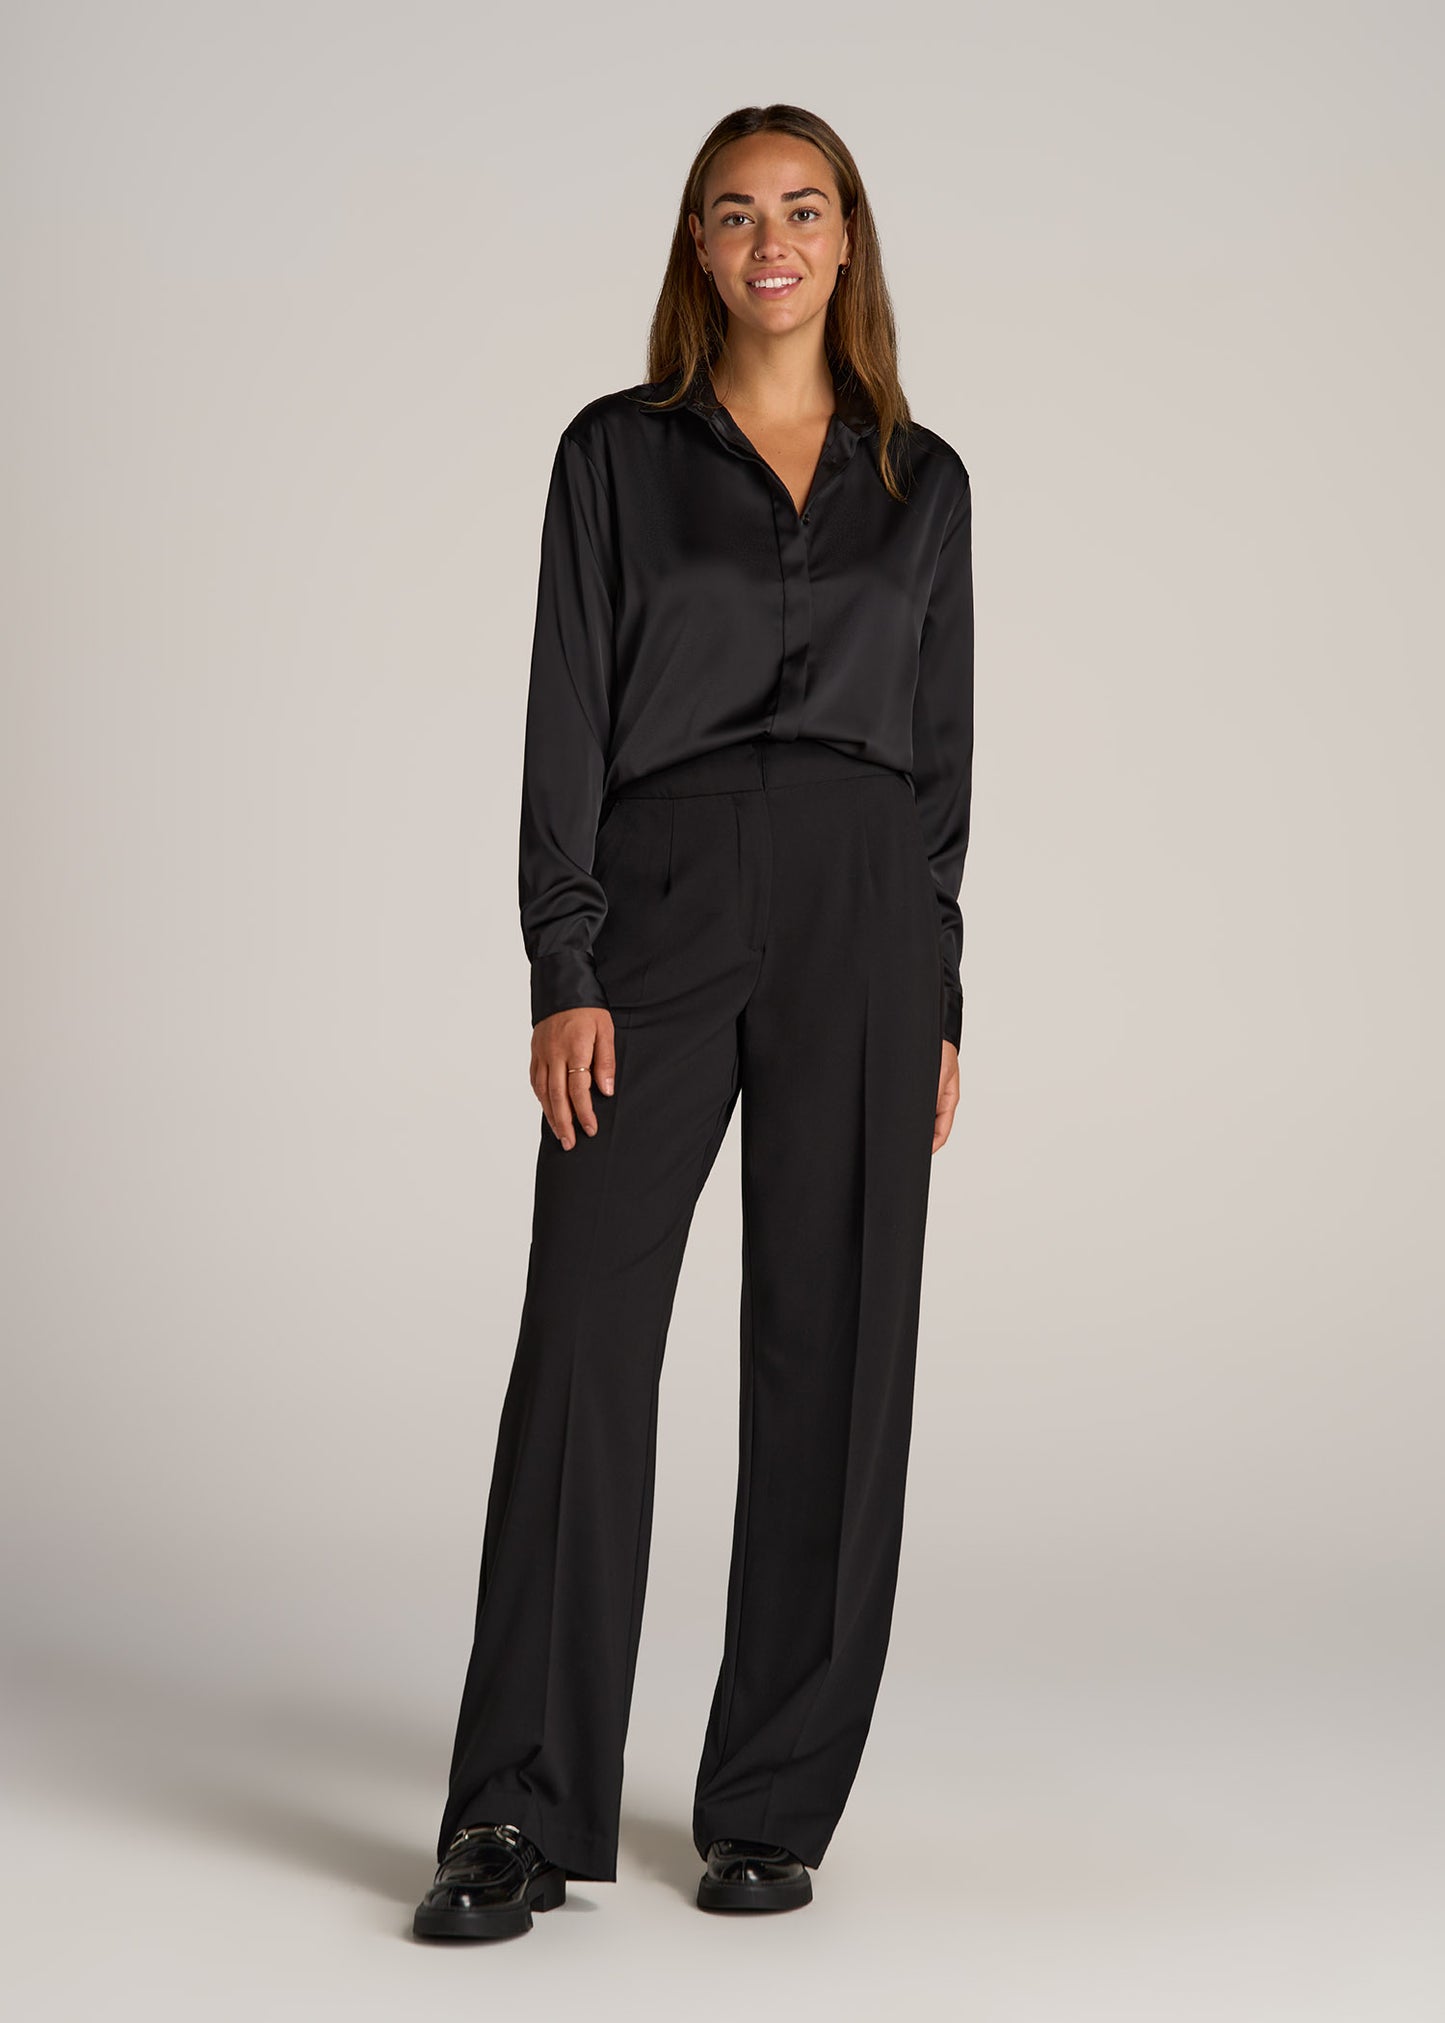 Relaxed Button Up Tall Women’s Blouse in Black